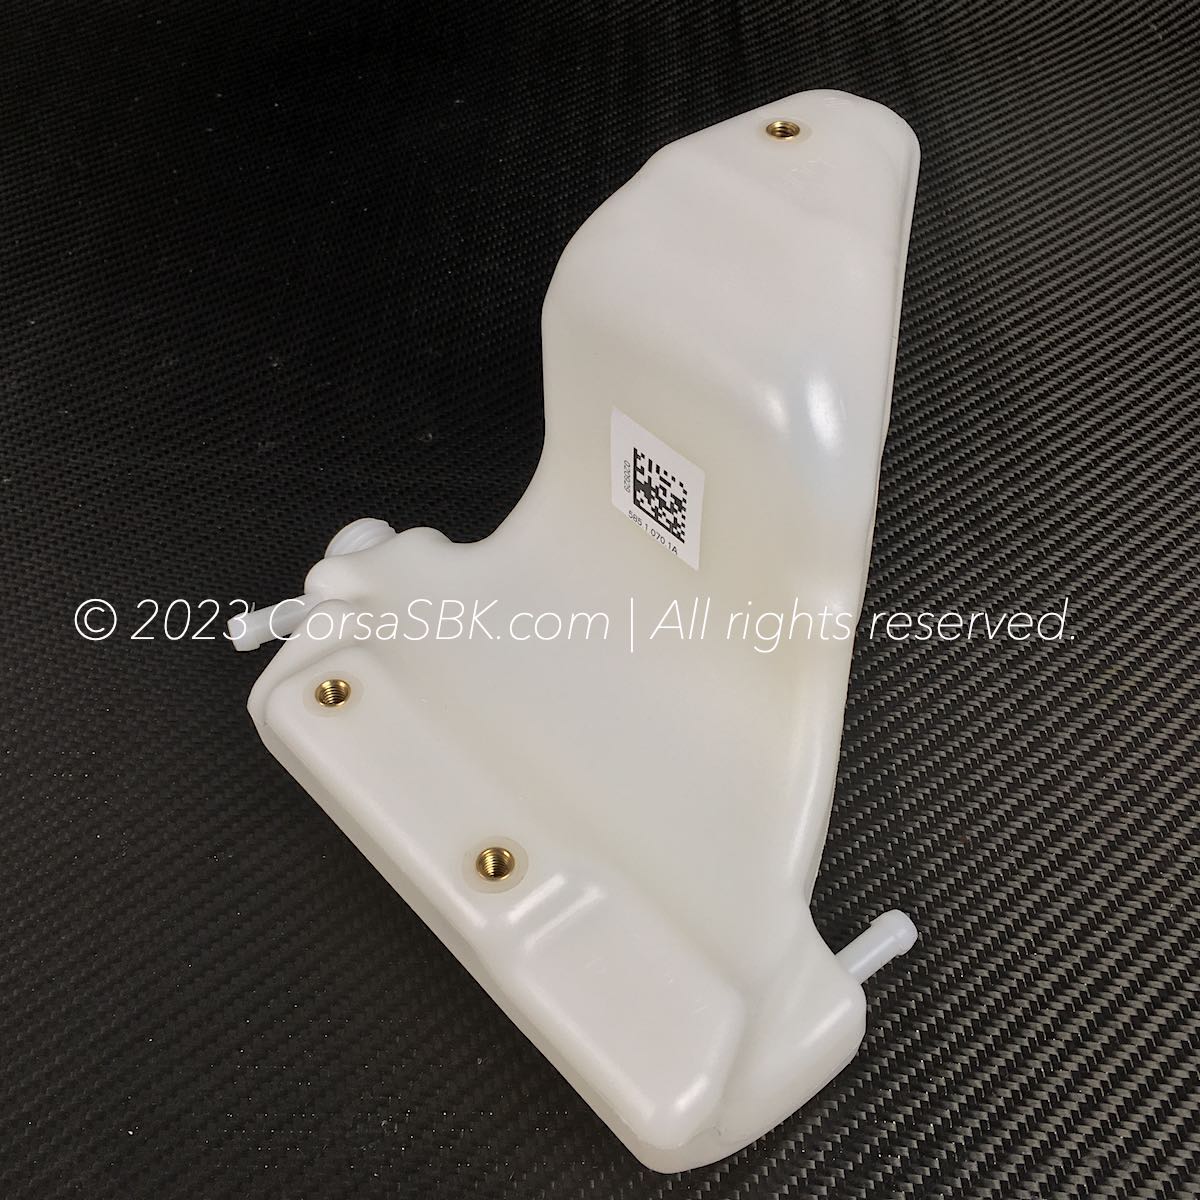 Ducati OE Multistrada 1200 water coolant expansion tank / reservoir MY  '10-'14 58510701A